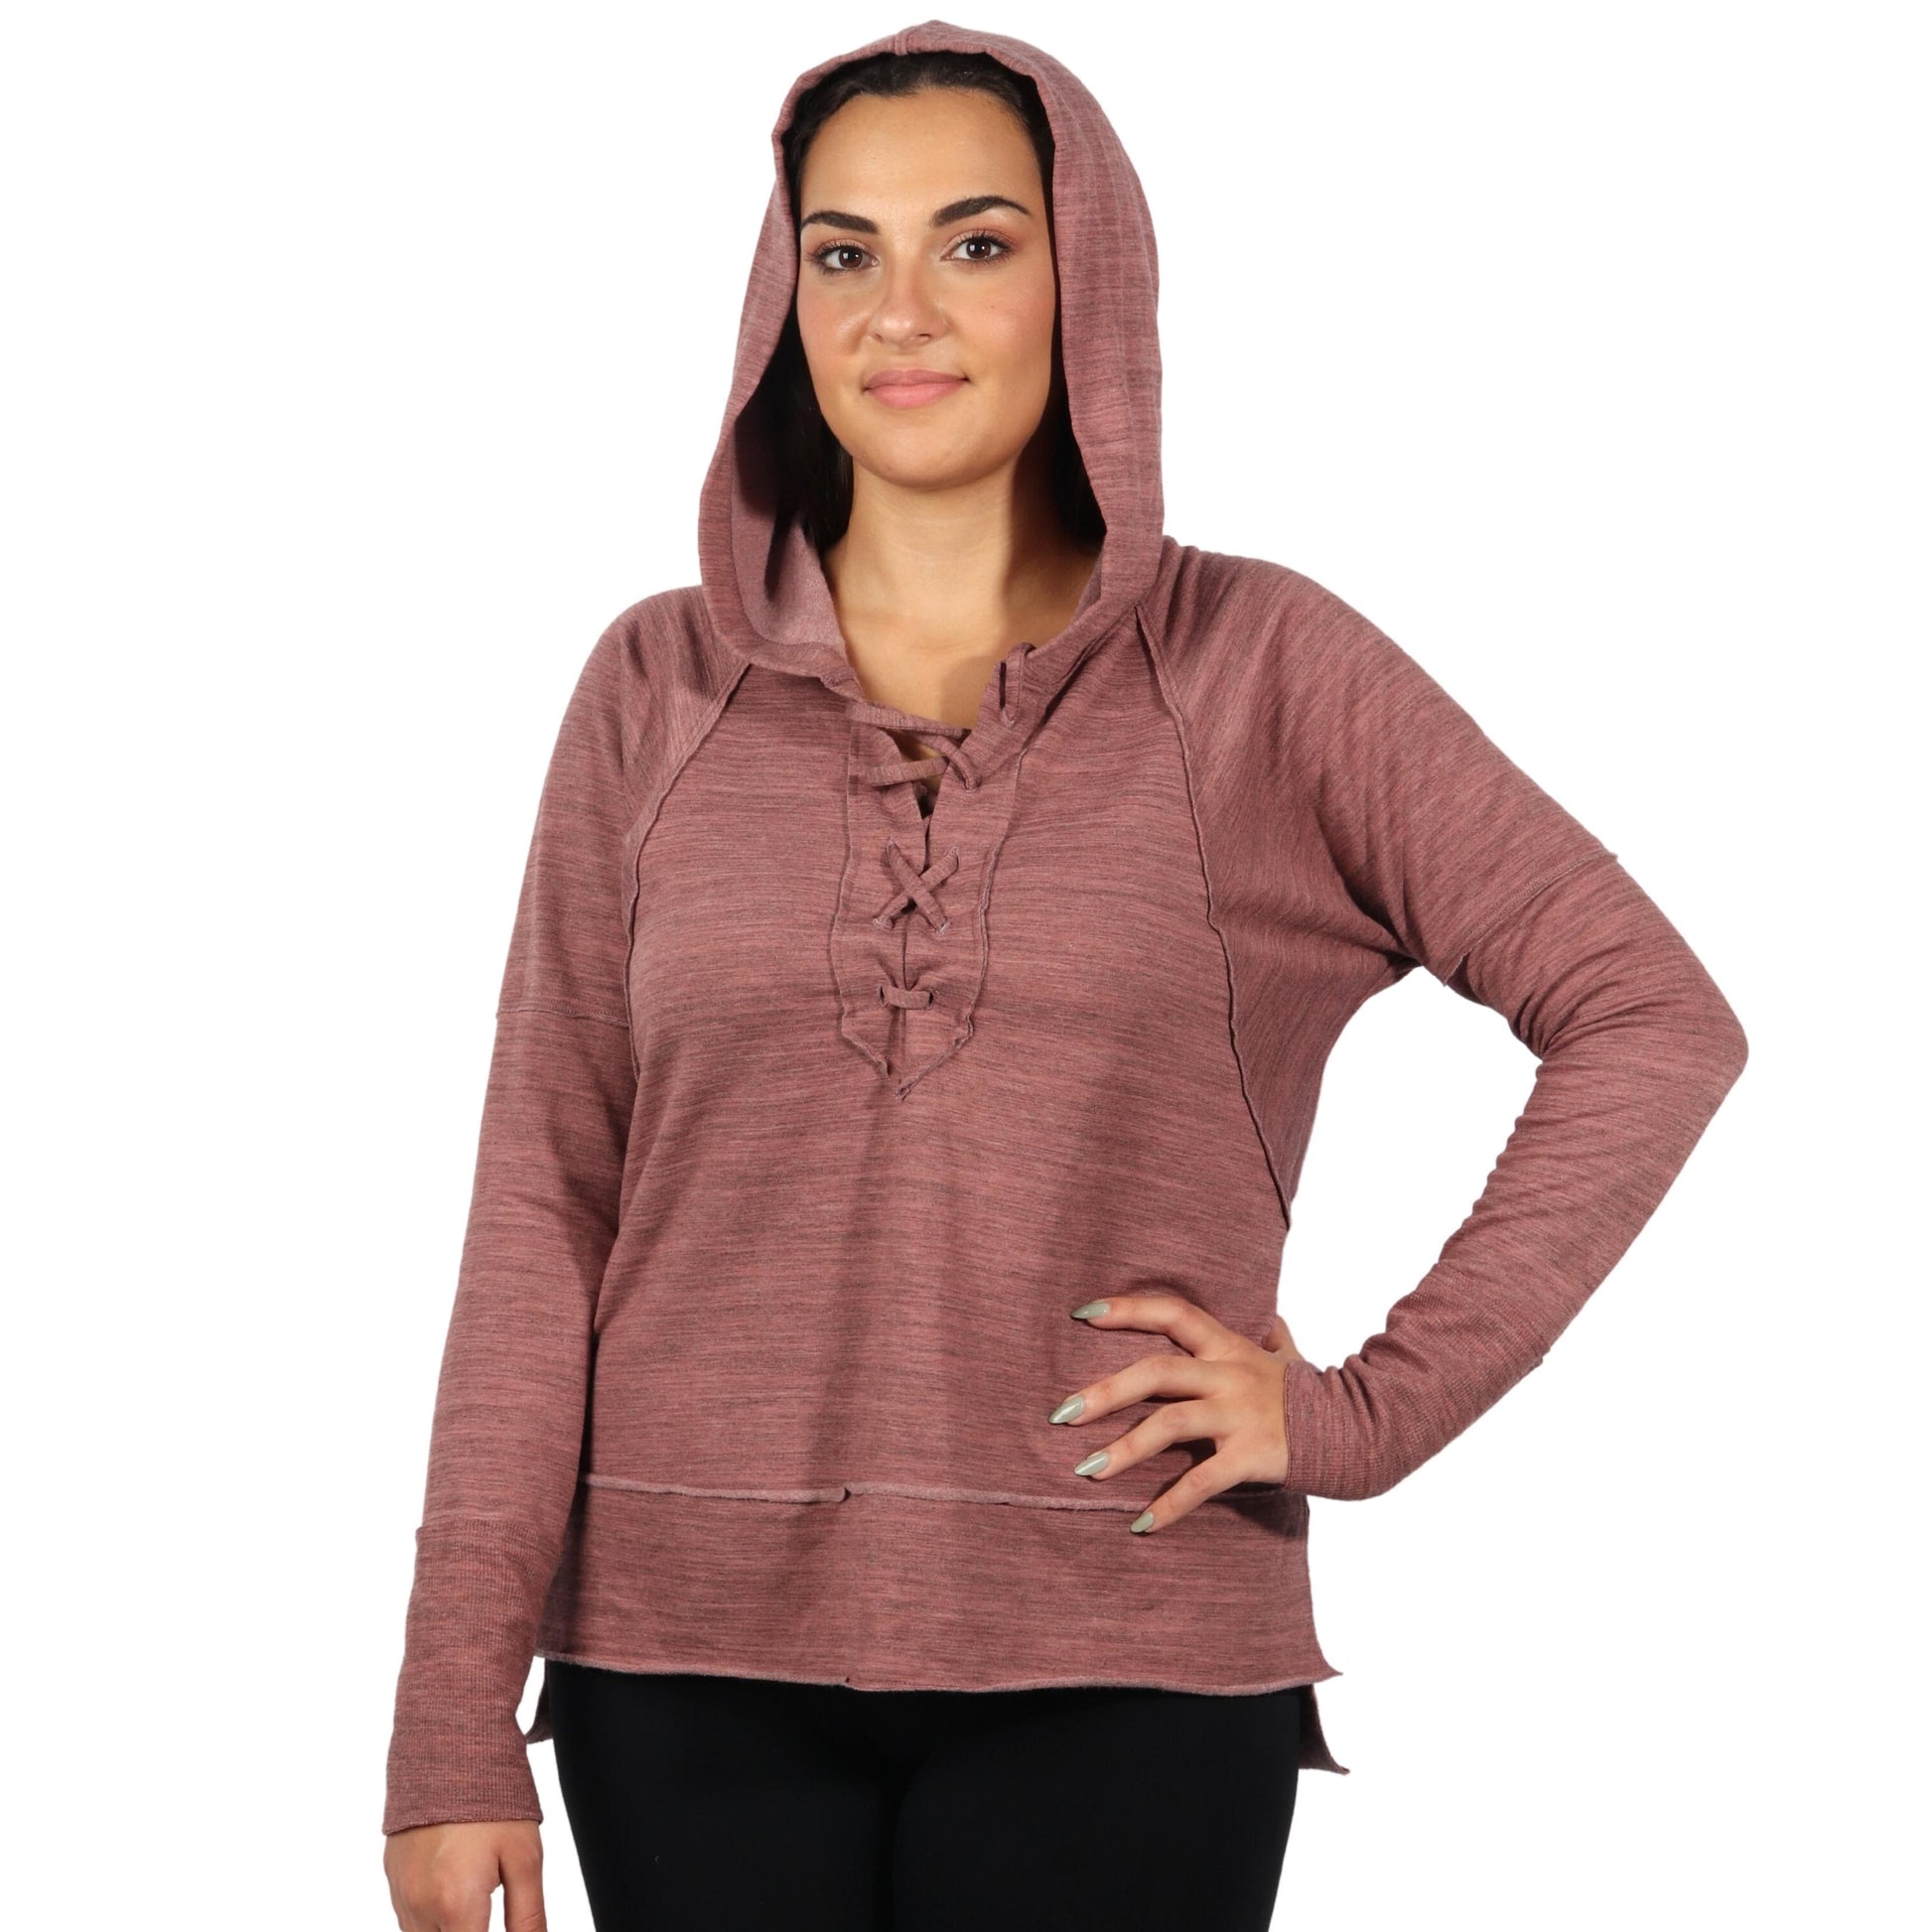 LUCKY BRAND - Celebrate Everything Women's Hoodies – Beyond Marketplace